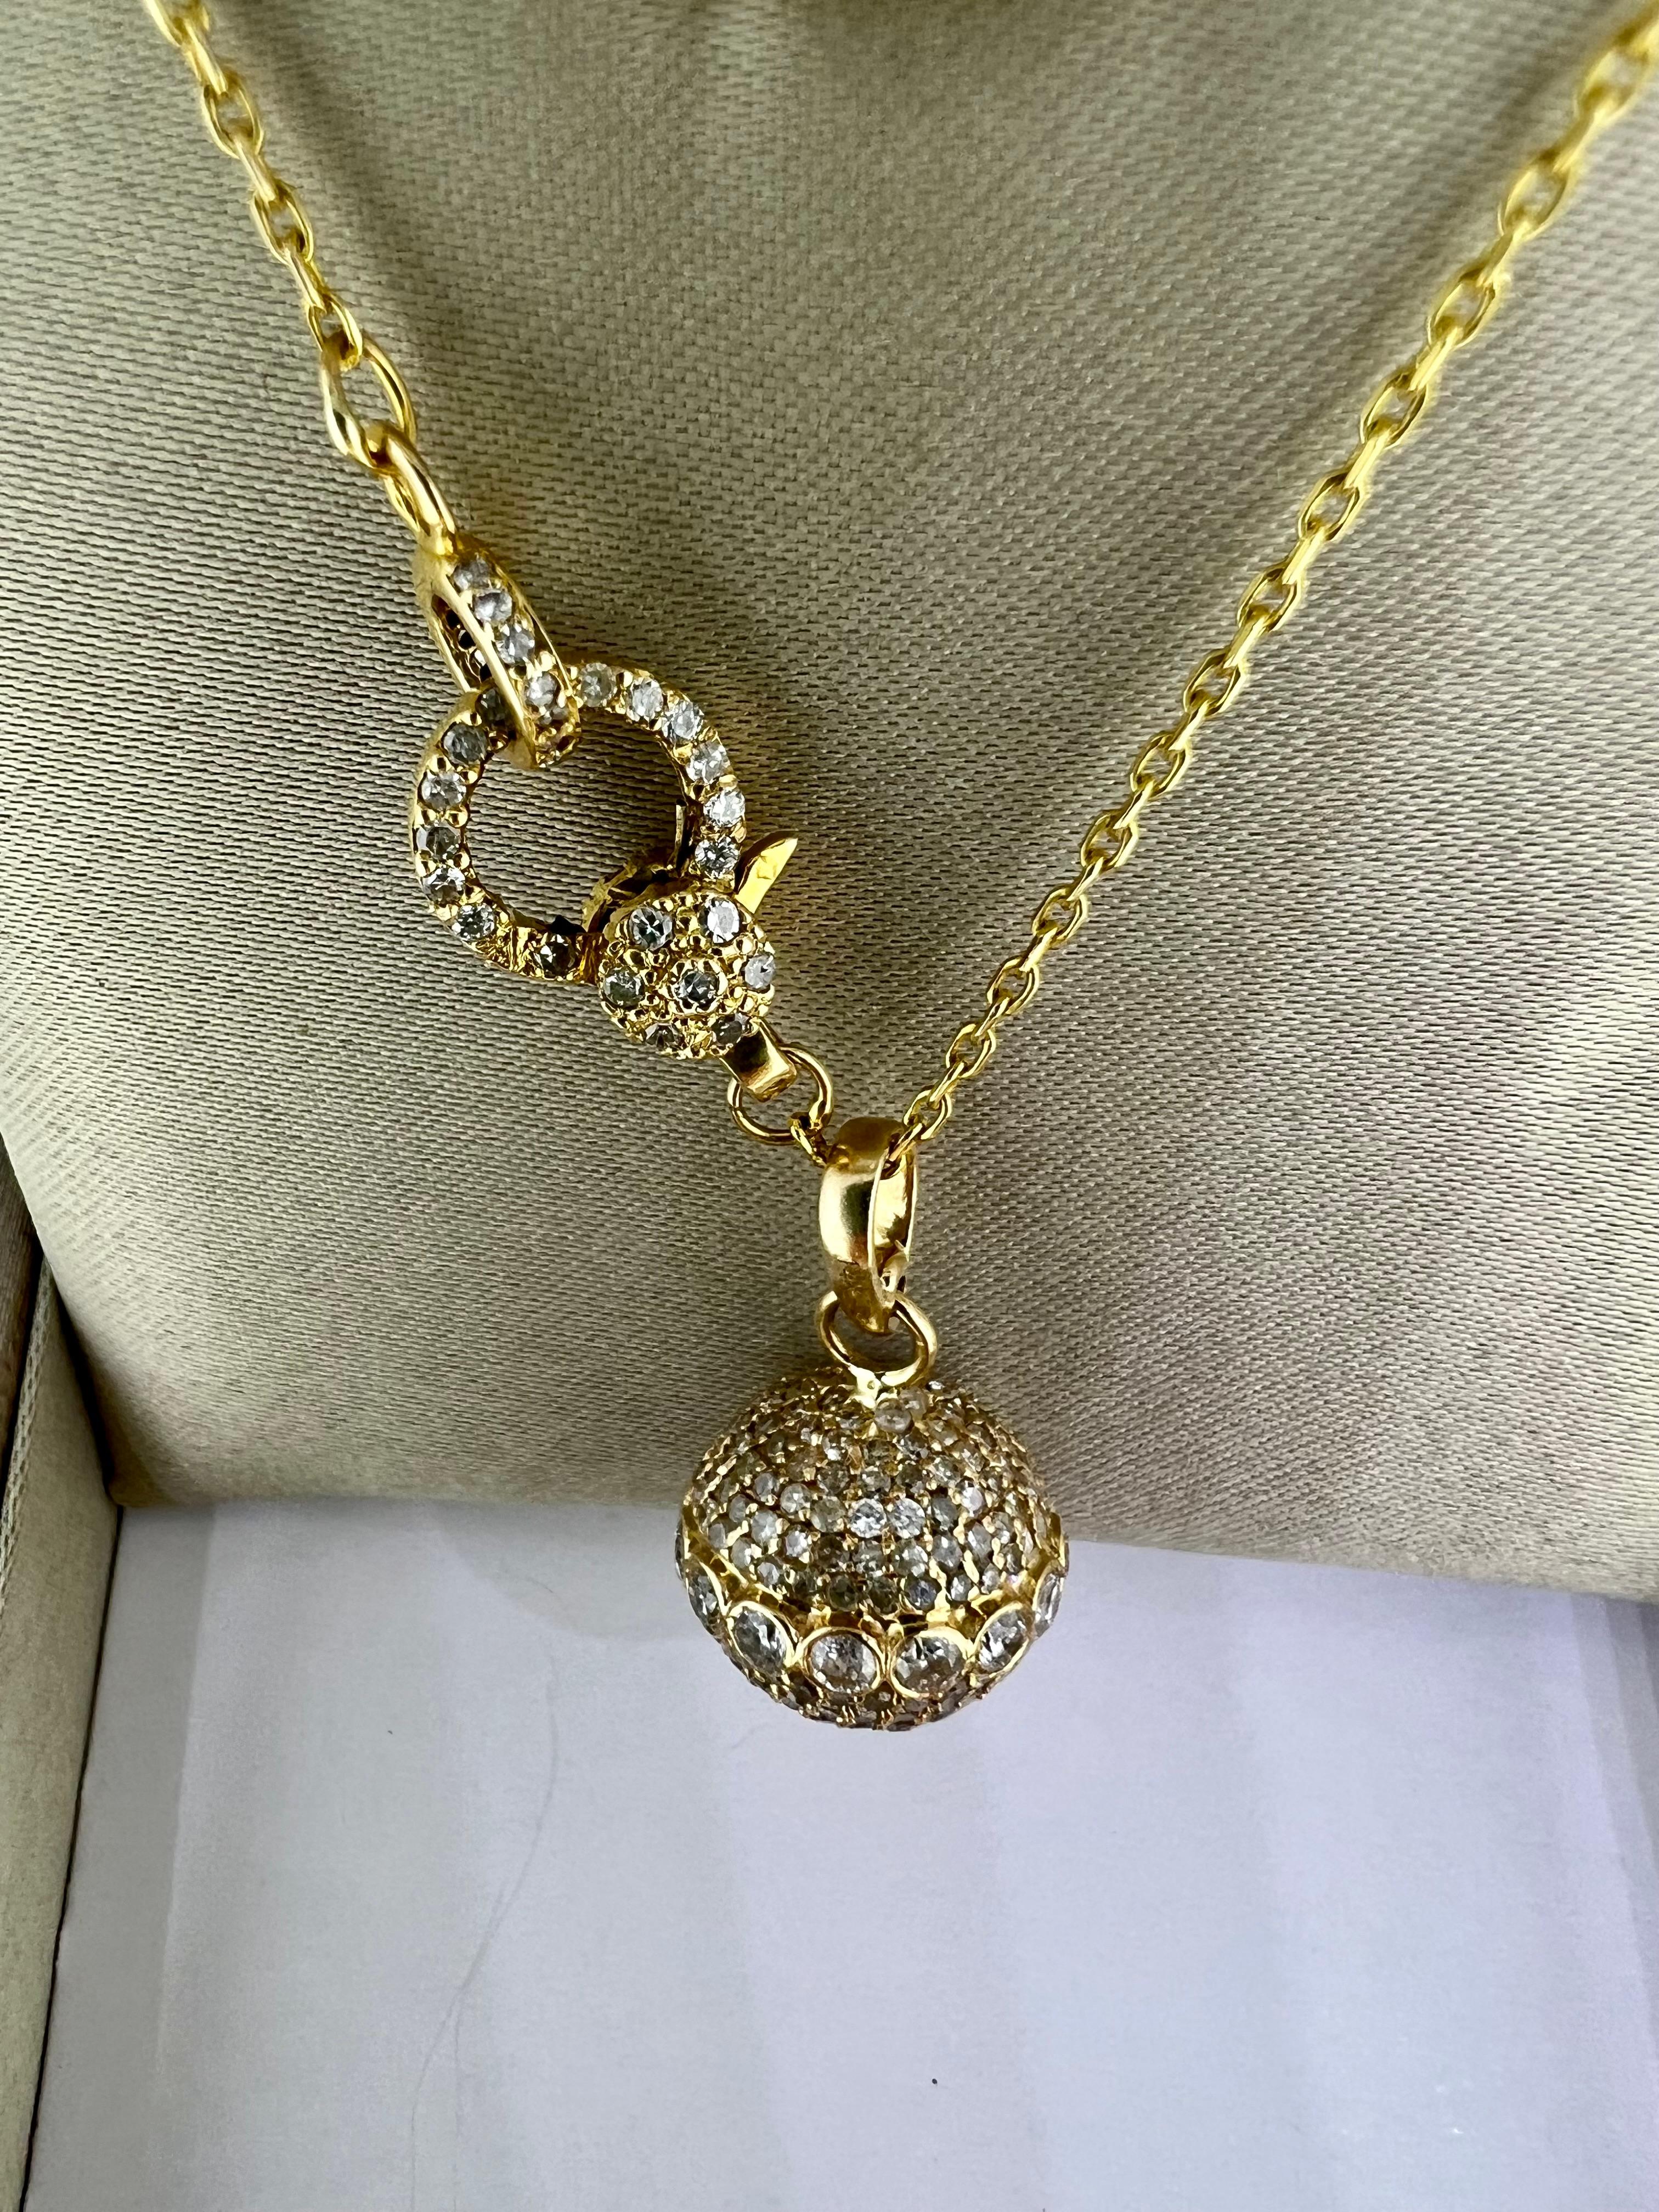 14k yellow gold orb necklace with diamond-encrusted clasp For Sale 1